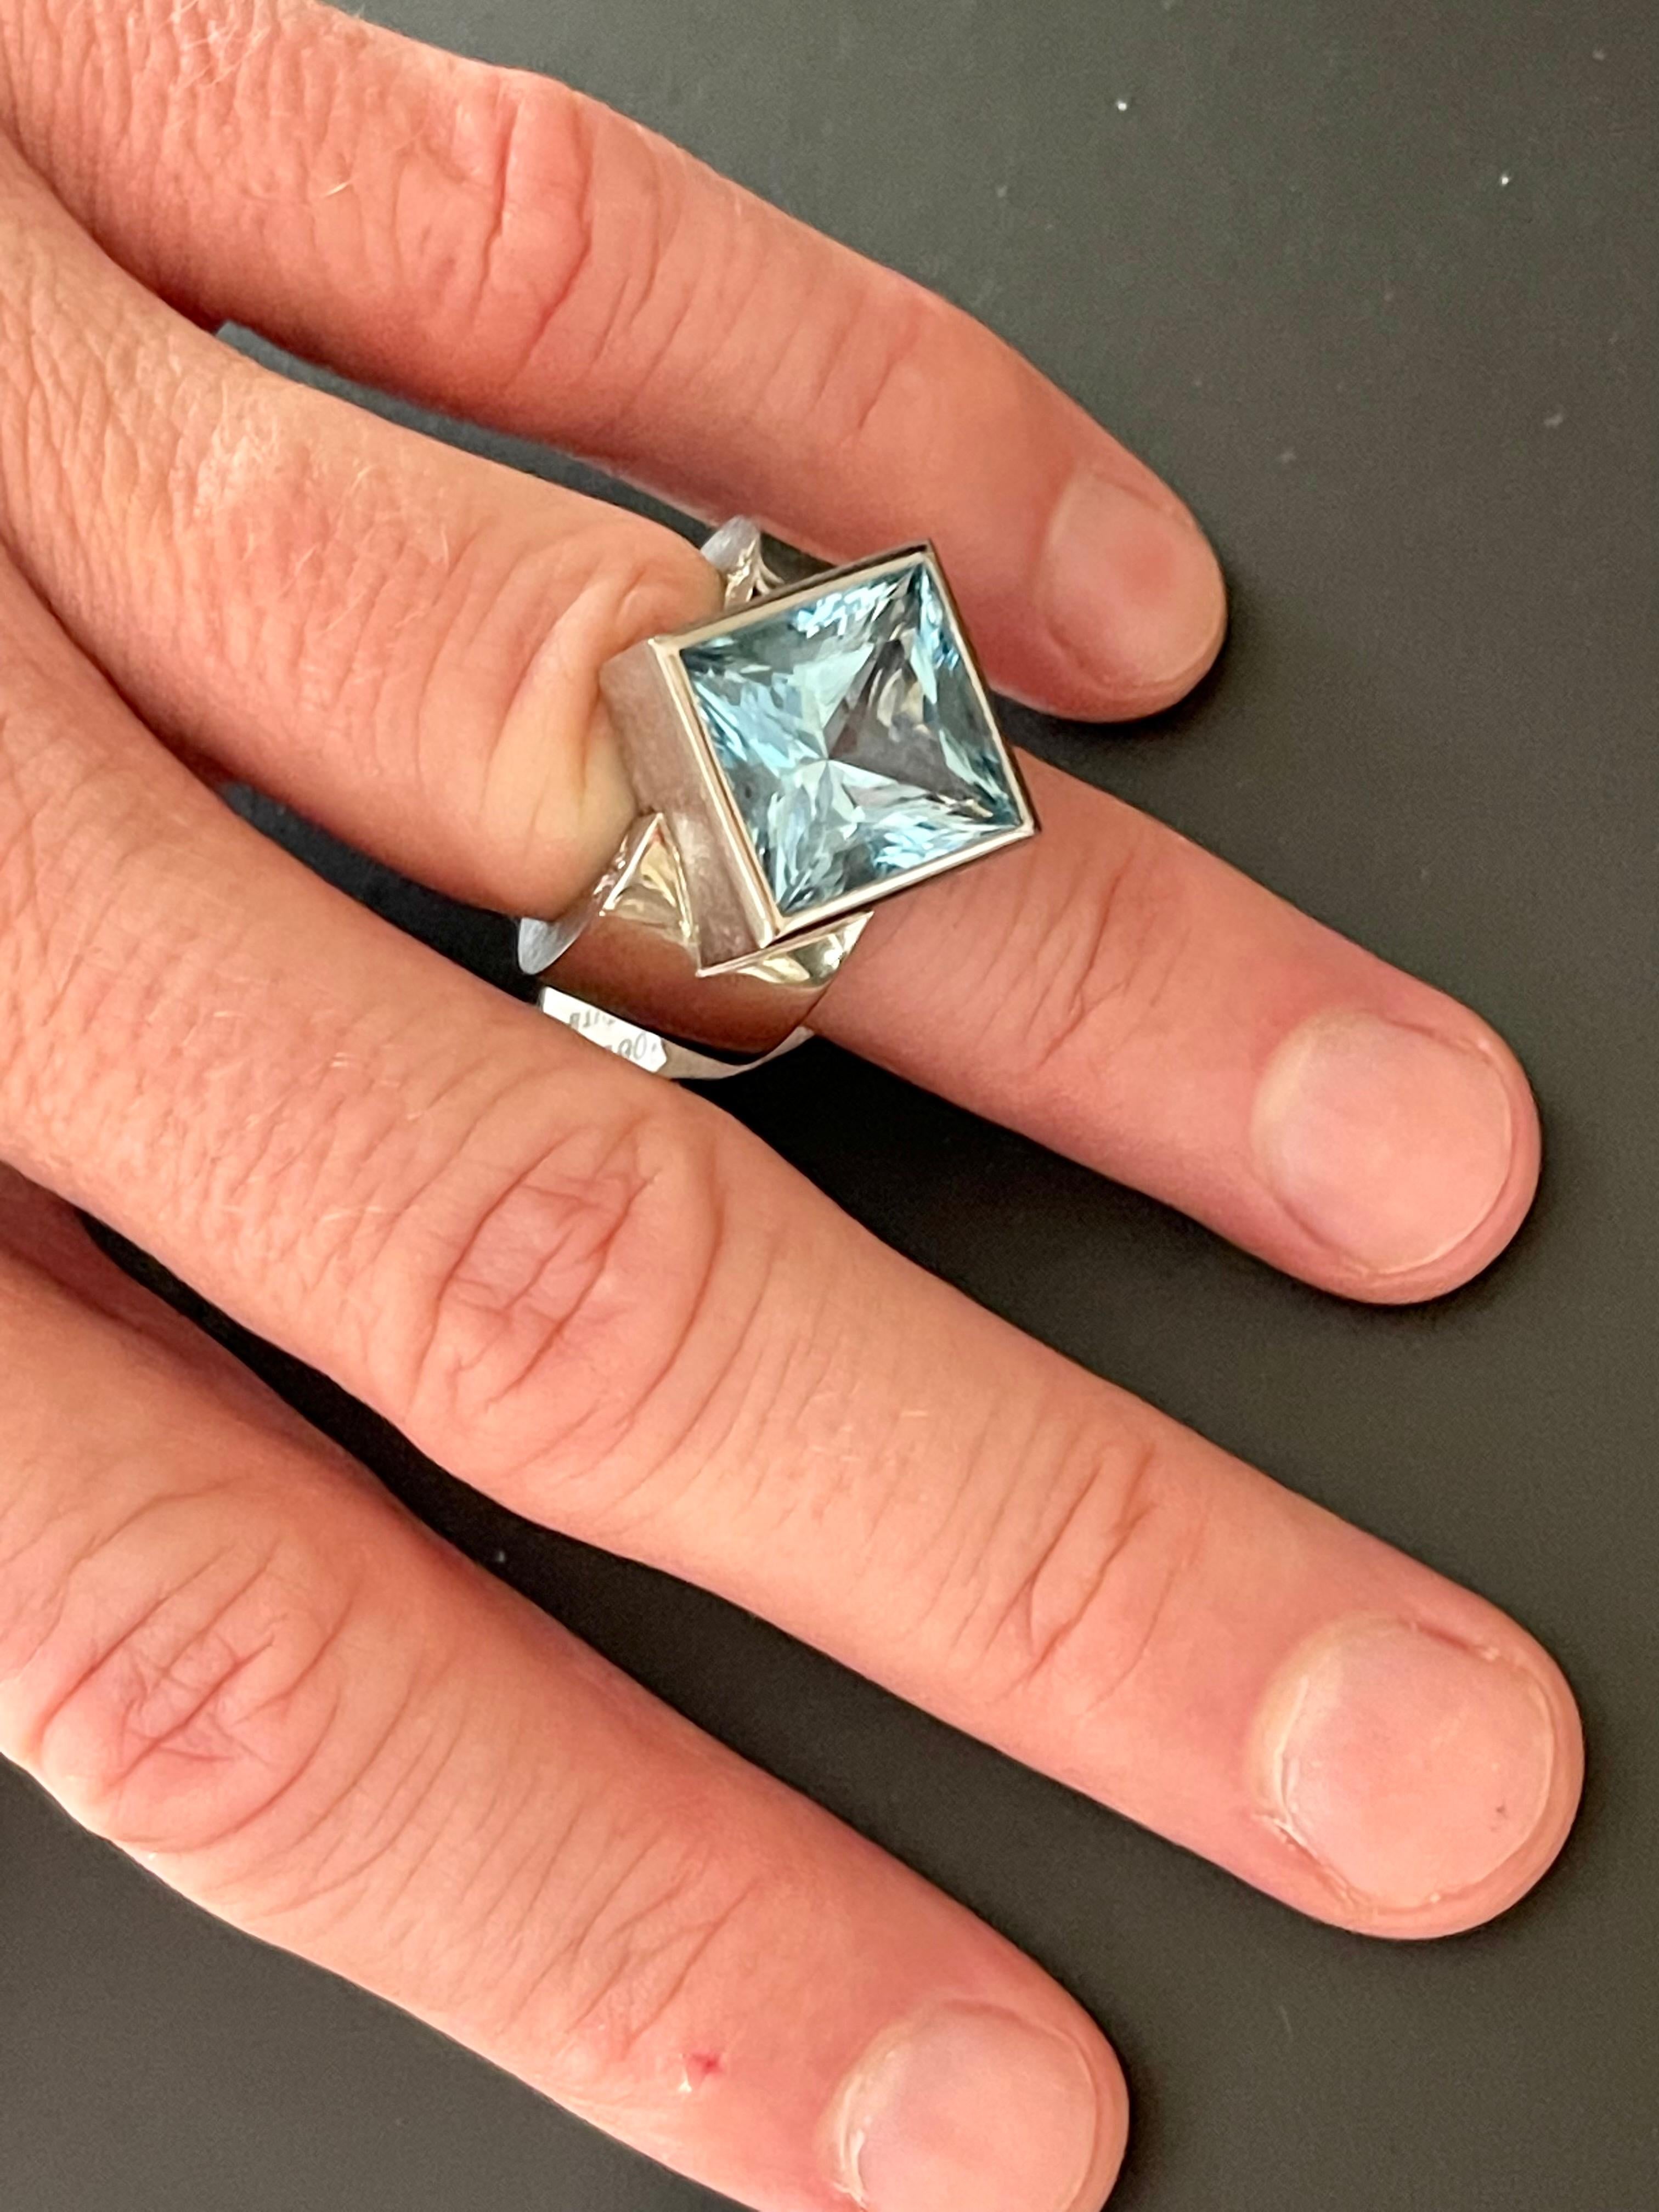 Captivating 18 K white Gold Satement Ring featuring a square cut Blue Topaz with the dimensions 1.4 cm x 1.4 cm. 4 small brilliant cut Diamonds on the side.
The ring is currently size 56/16 (US size 8) can be resized easily. 
Masterfully handcrafted